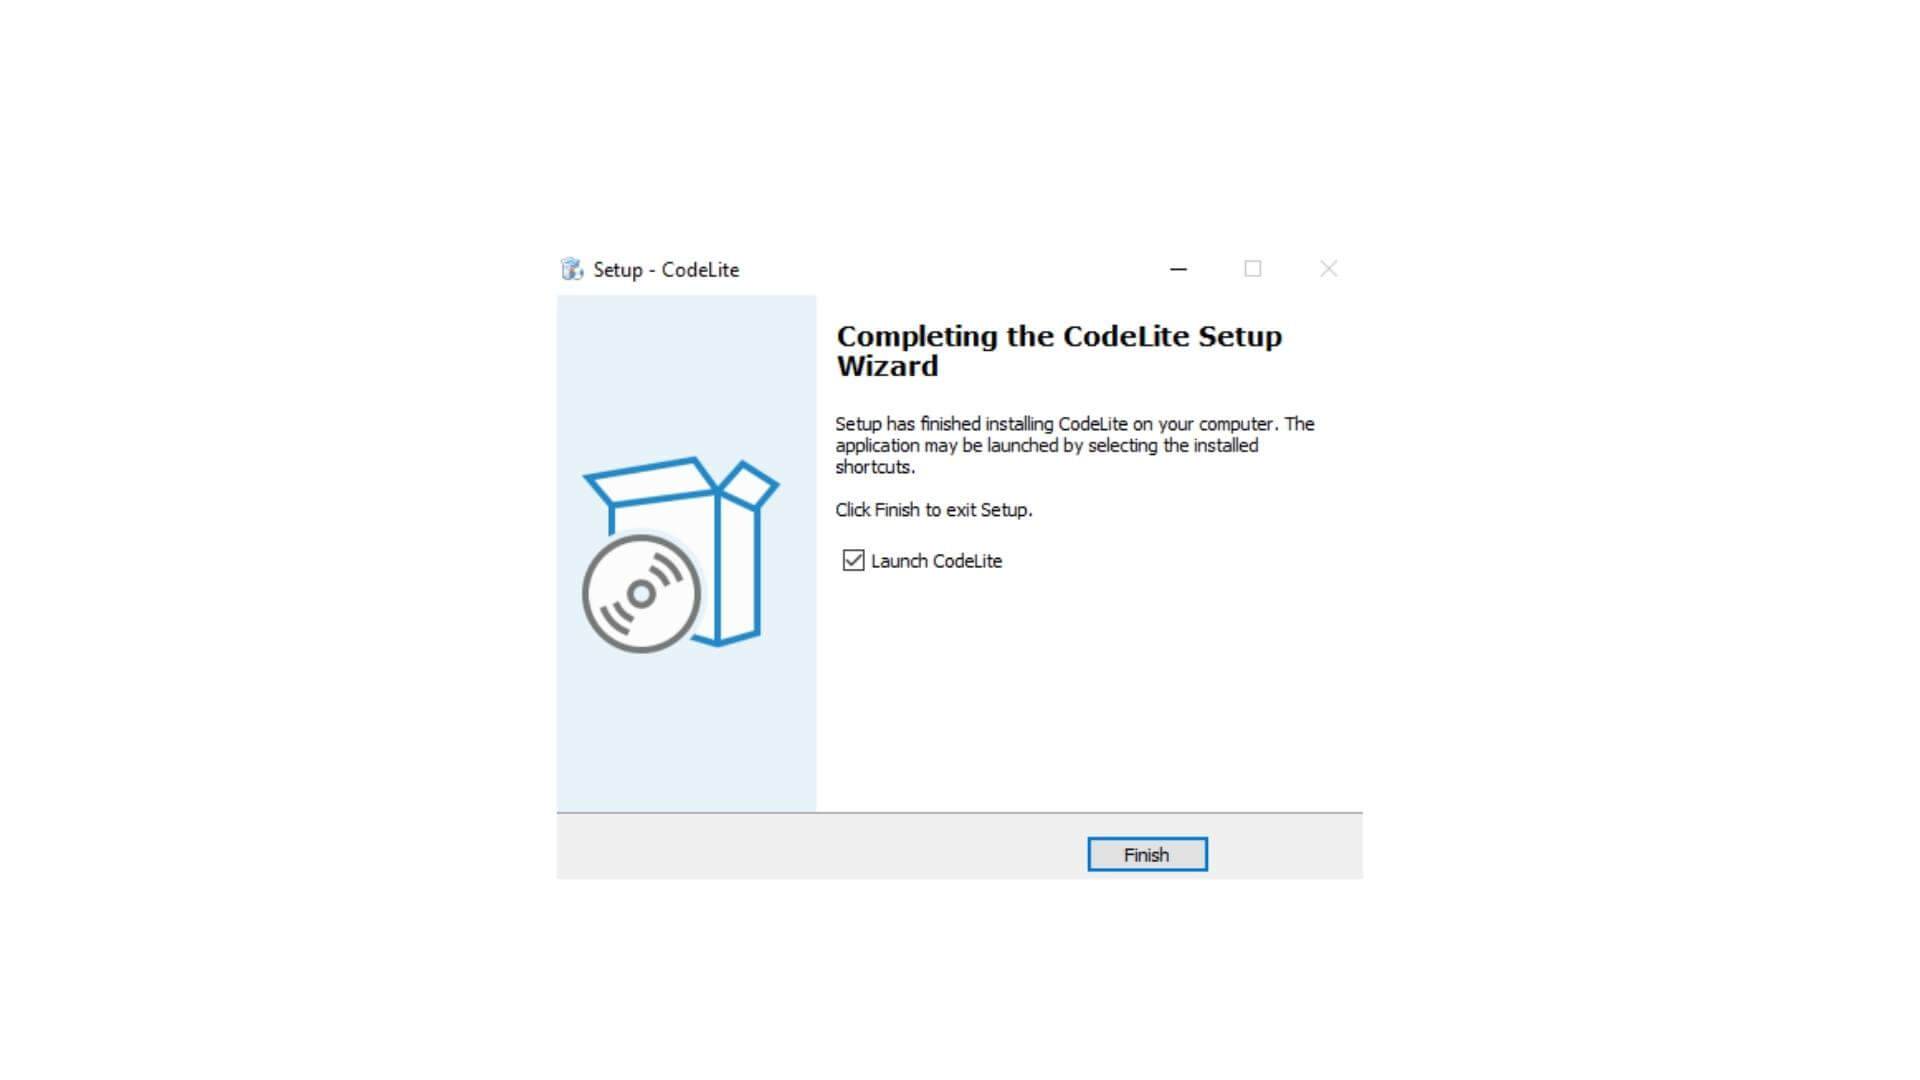 Setup has finished installing codelite on the computer 10